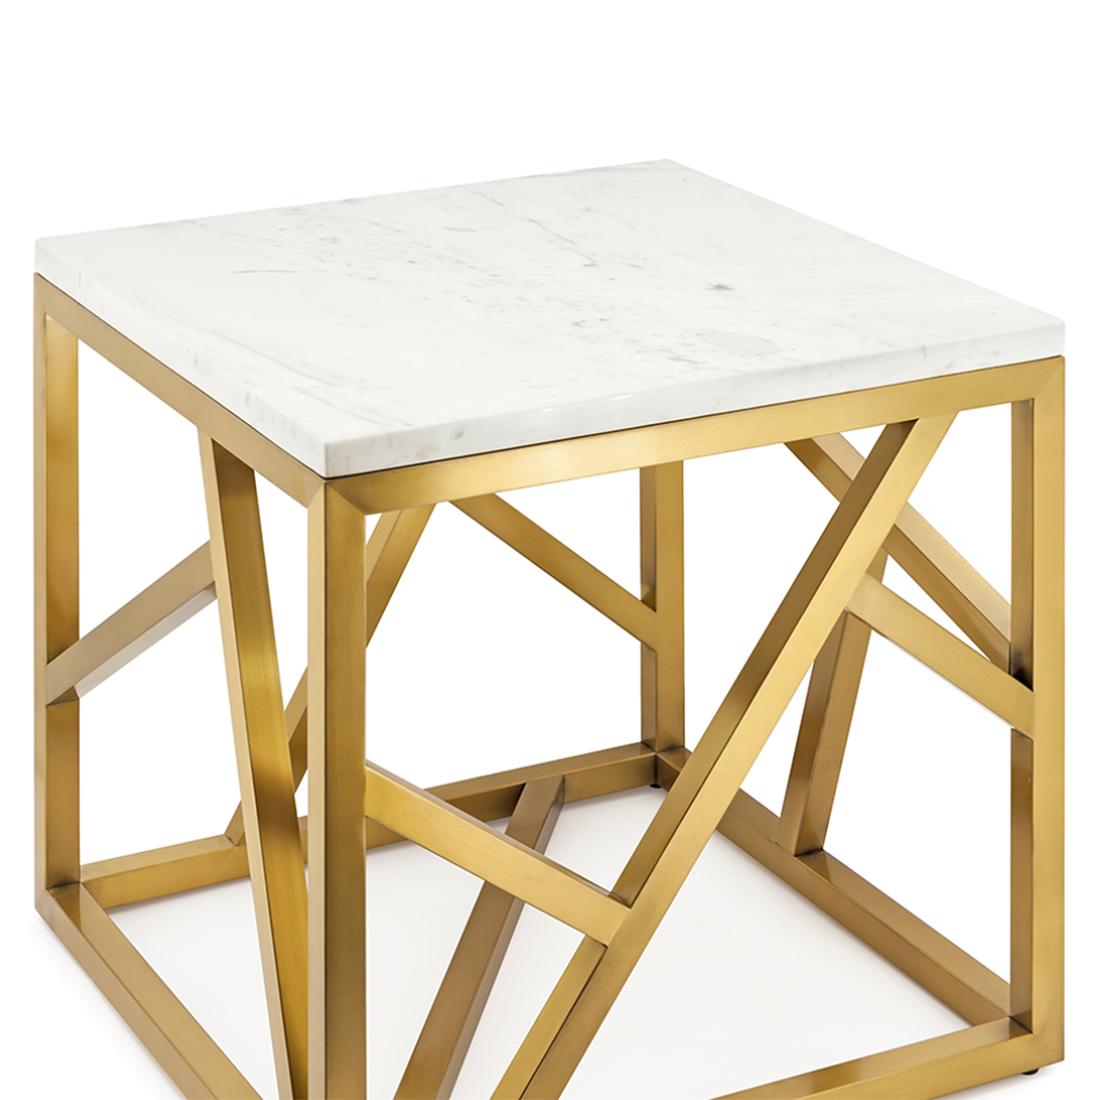 Side table Raytona brushed with metal base
in brushed brass finish and with white marble top.